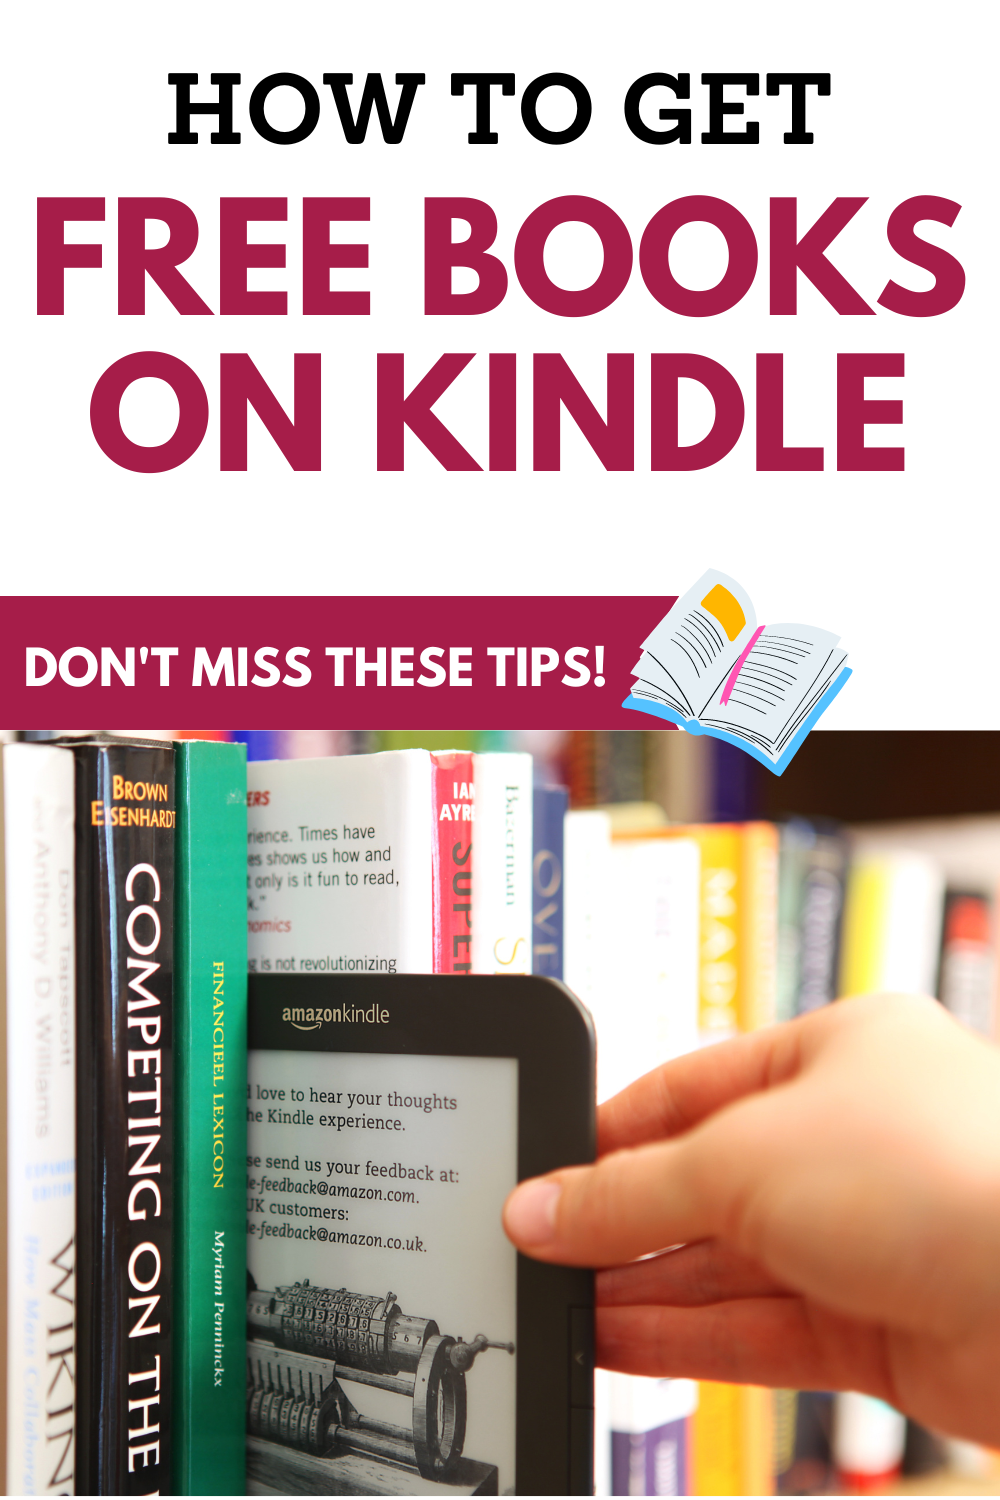 How to Get FREE Kindle Books Now